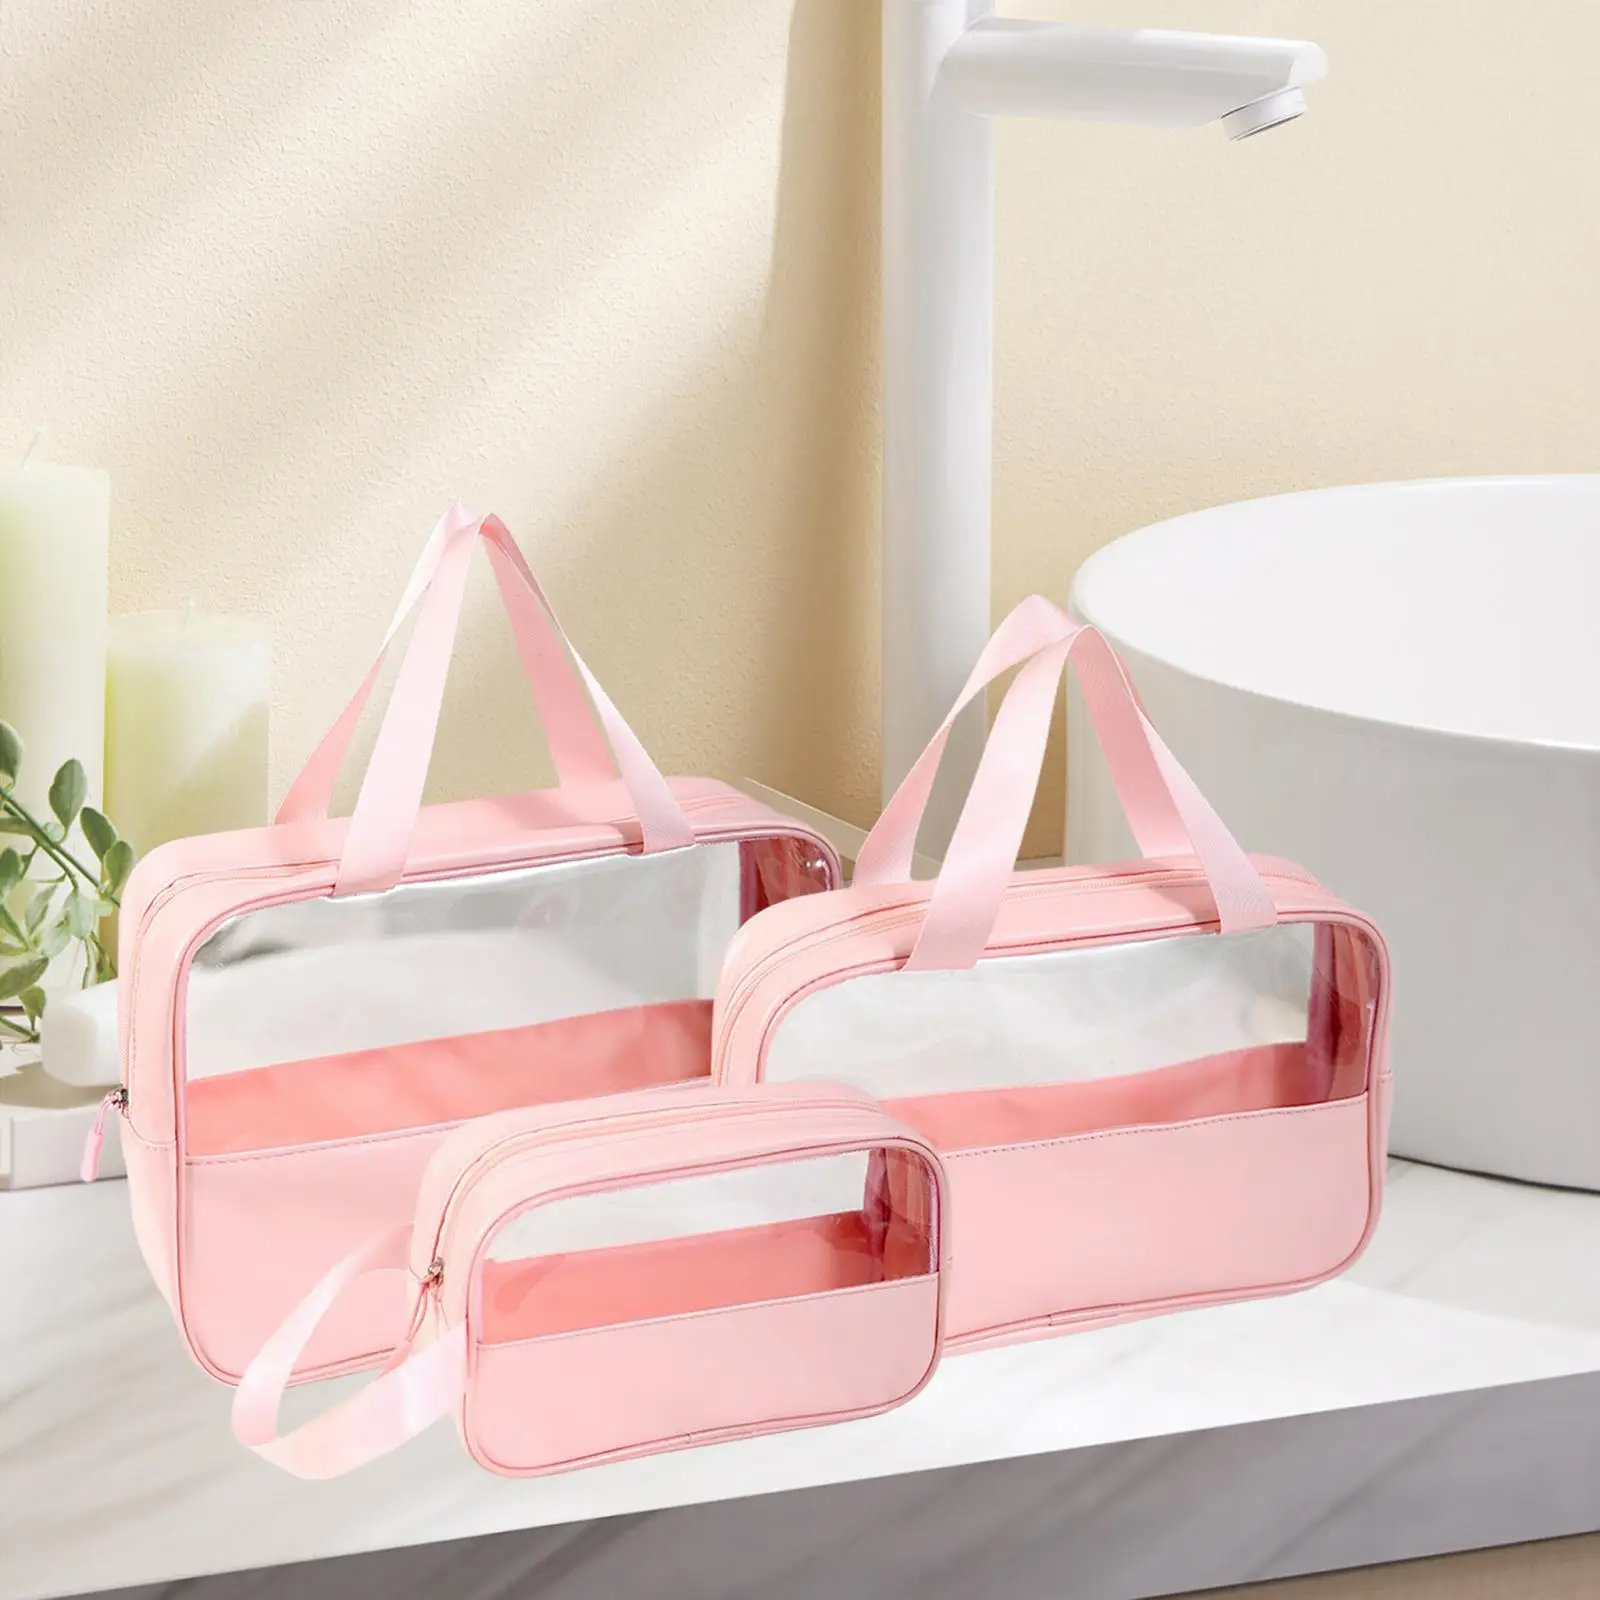 3Pcs Clear Makeup Bag Cosmetic Bag Pouch Make up Organizer Clear Travel Bag with Zipper Storage Bag Cosmetic Case Toiletry Bag